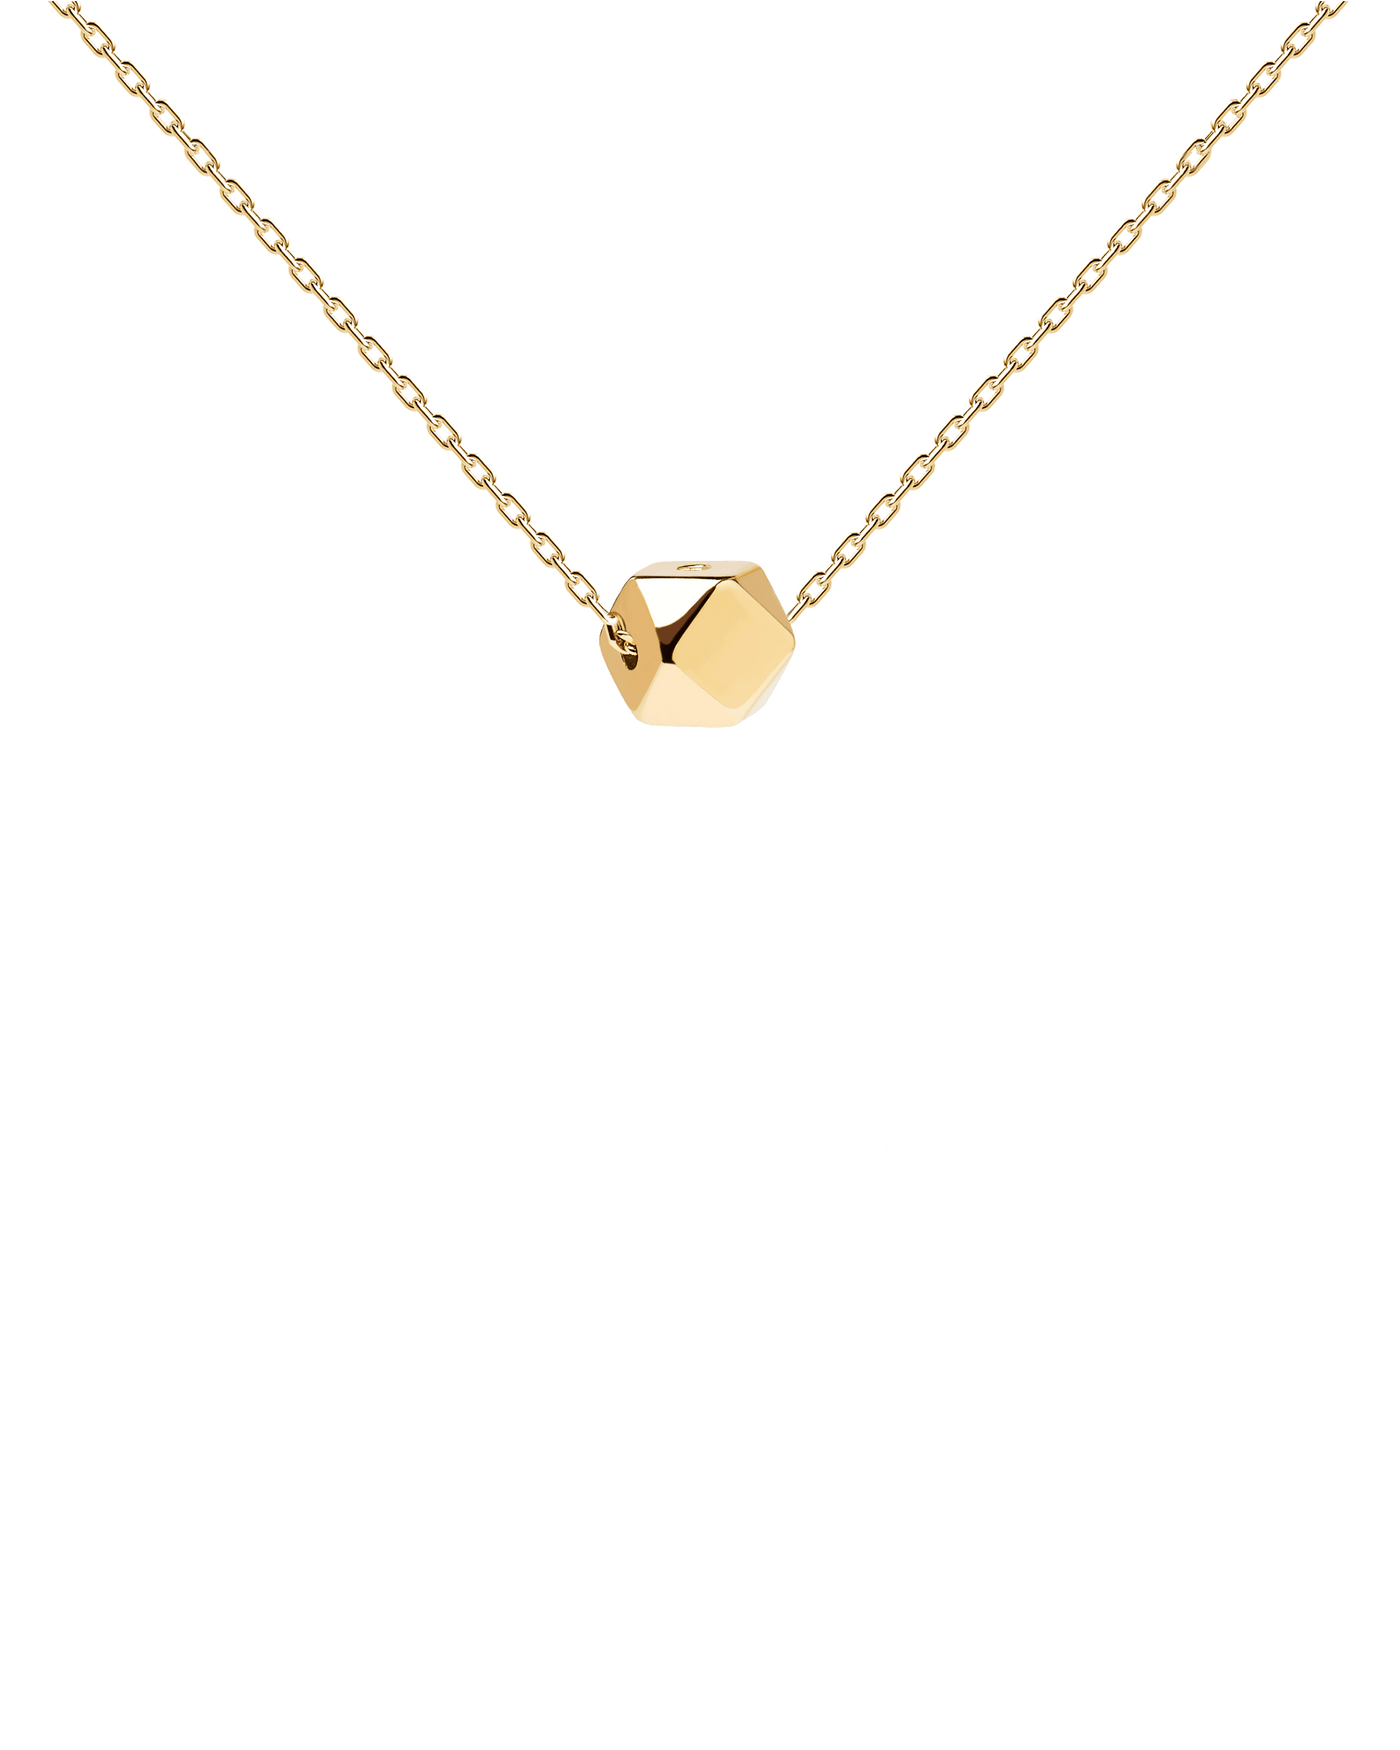 2023 Selection | Bambina Gold Necklace. Get the latest arrival from PDPAOLA. Place your order safely and get this Best Seller. Free Shipping over 40€